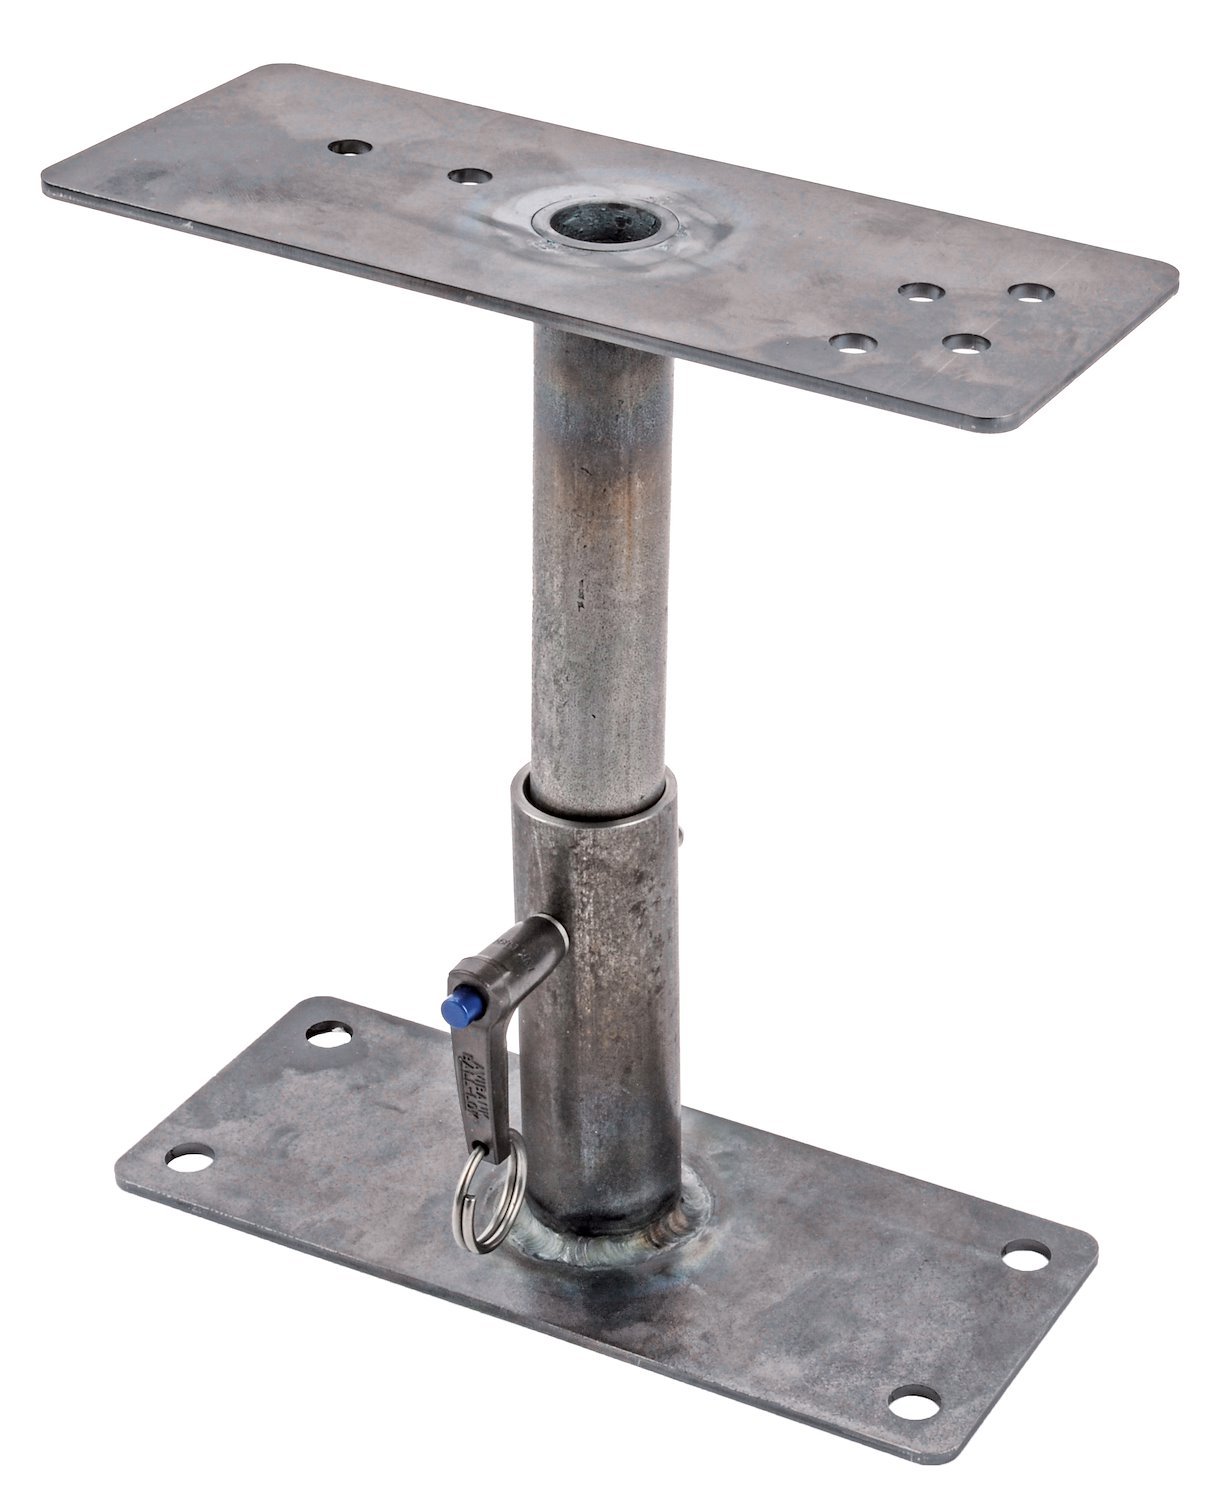 Automatic Transmission Shifter Pedestal for Select Hurst and B&M Shifters [Adjustable from 4 in. to 8 1/4 in. High]